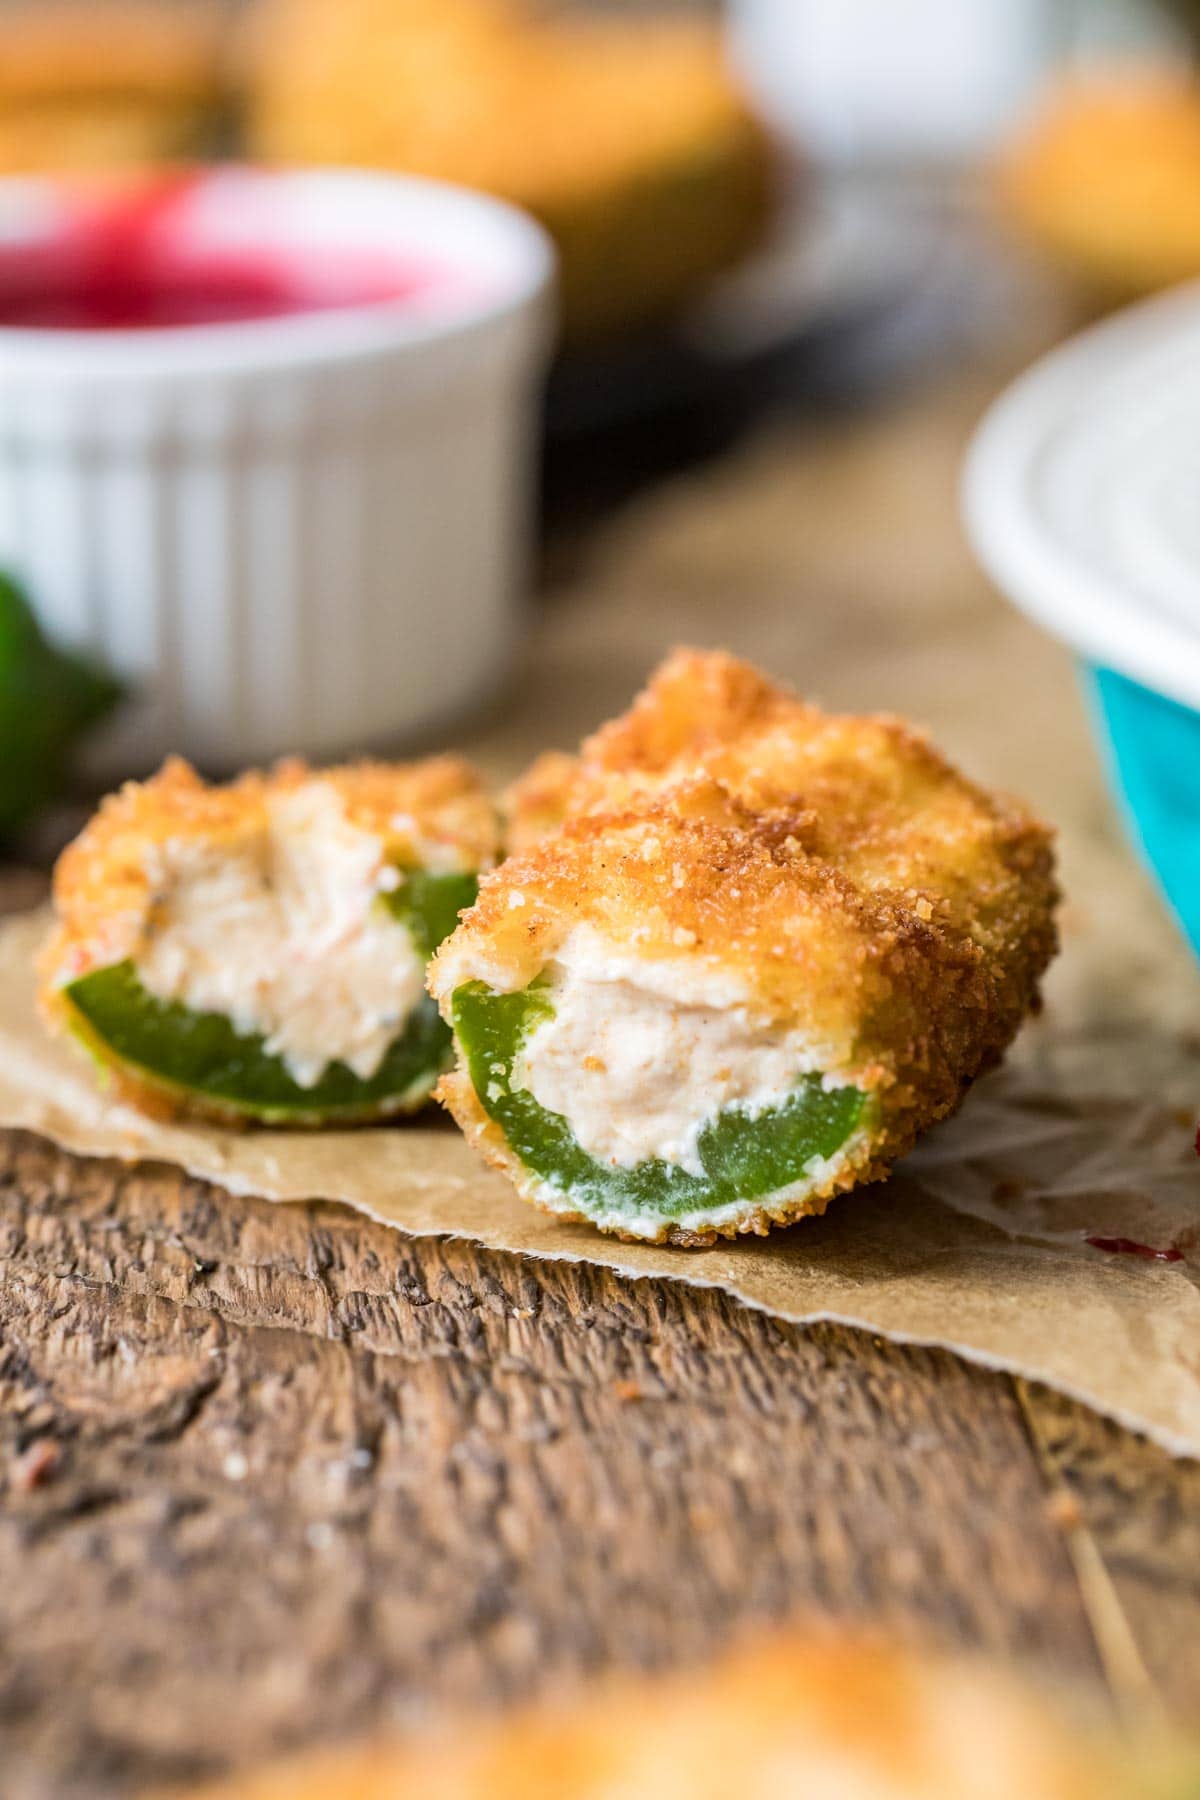 Jalapeno popper that has been cut in half to show its cream cheese filling.